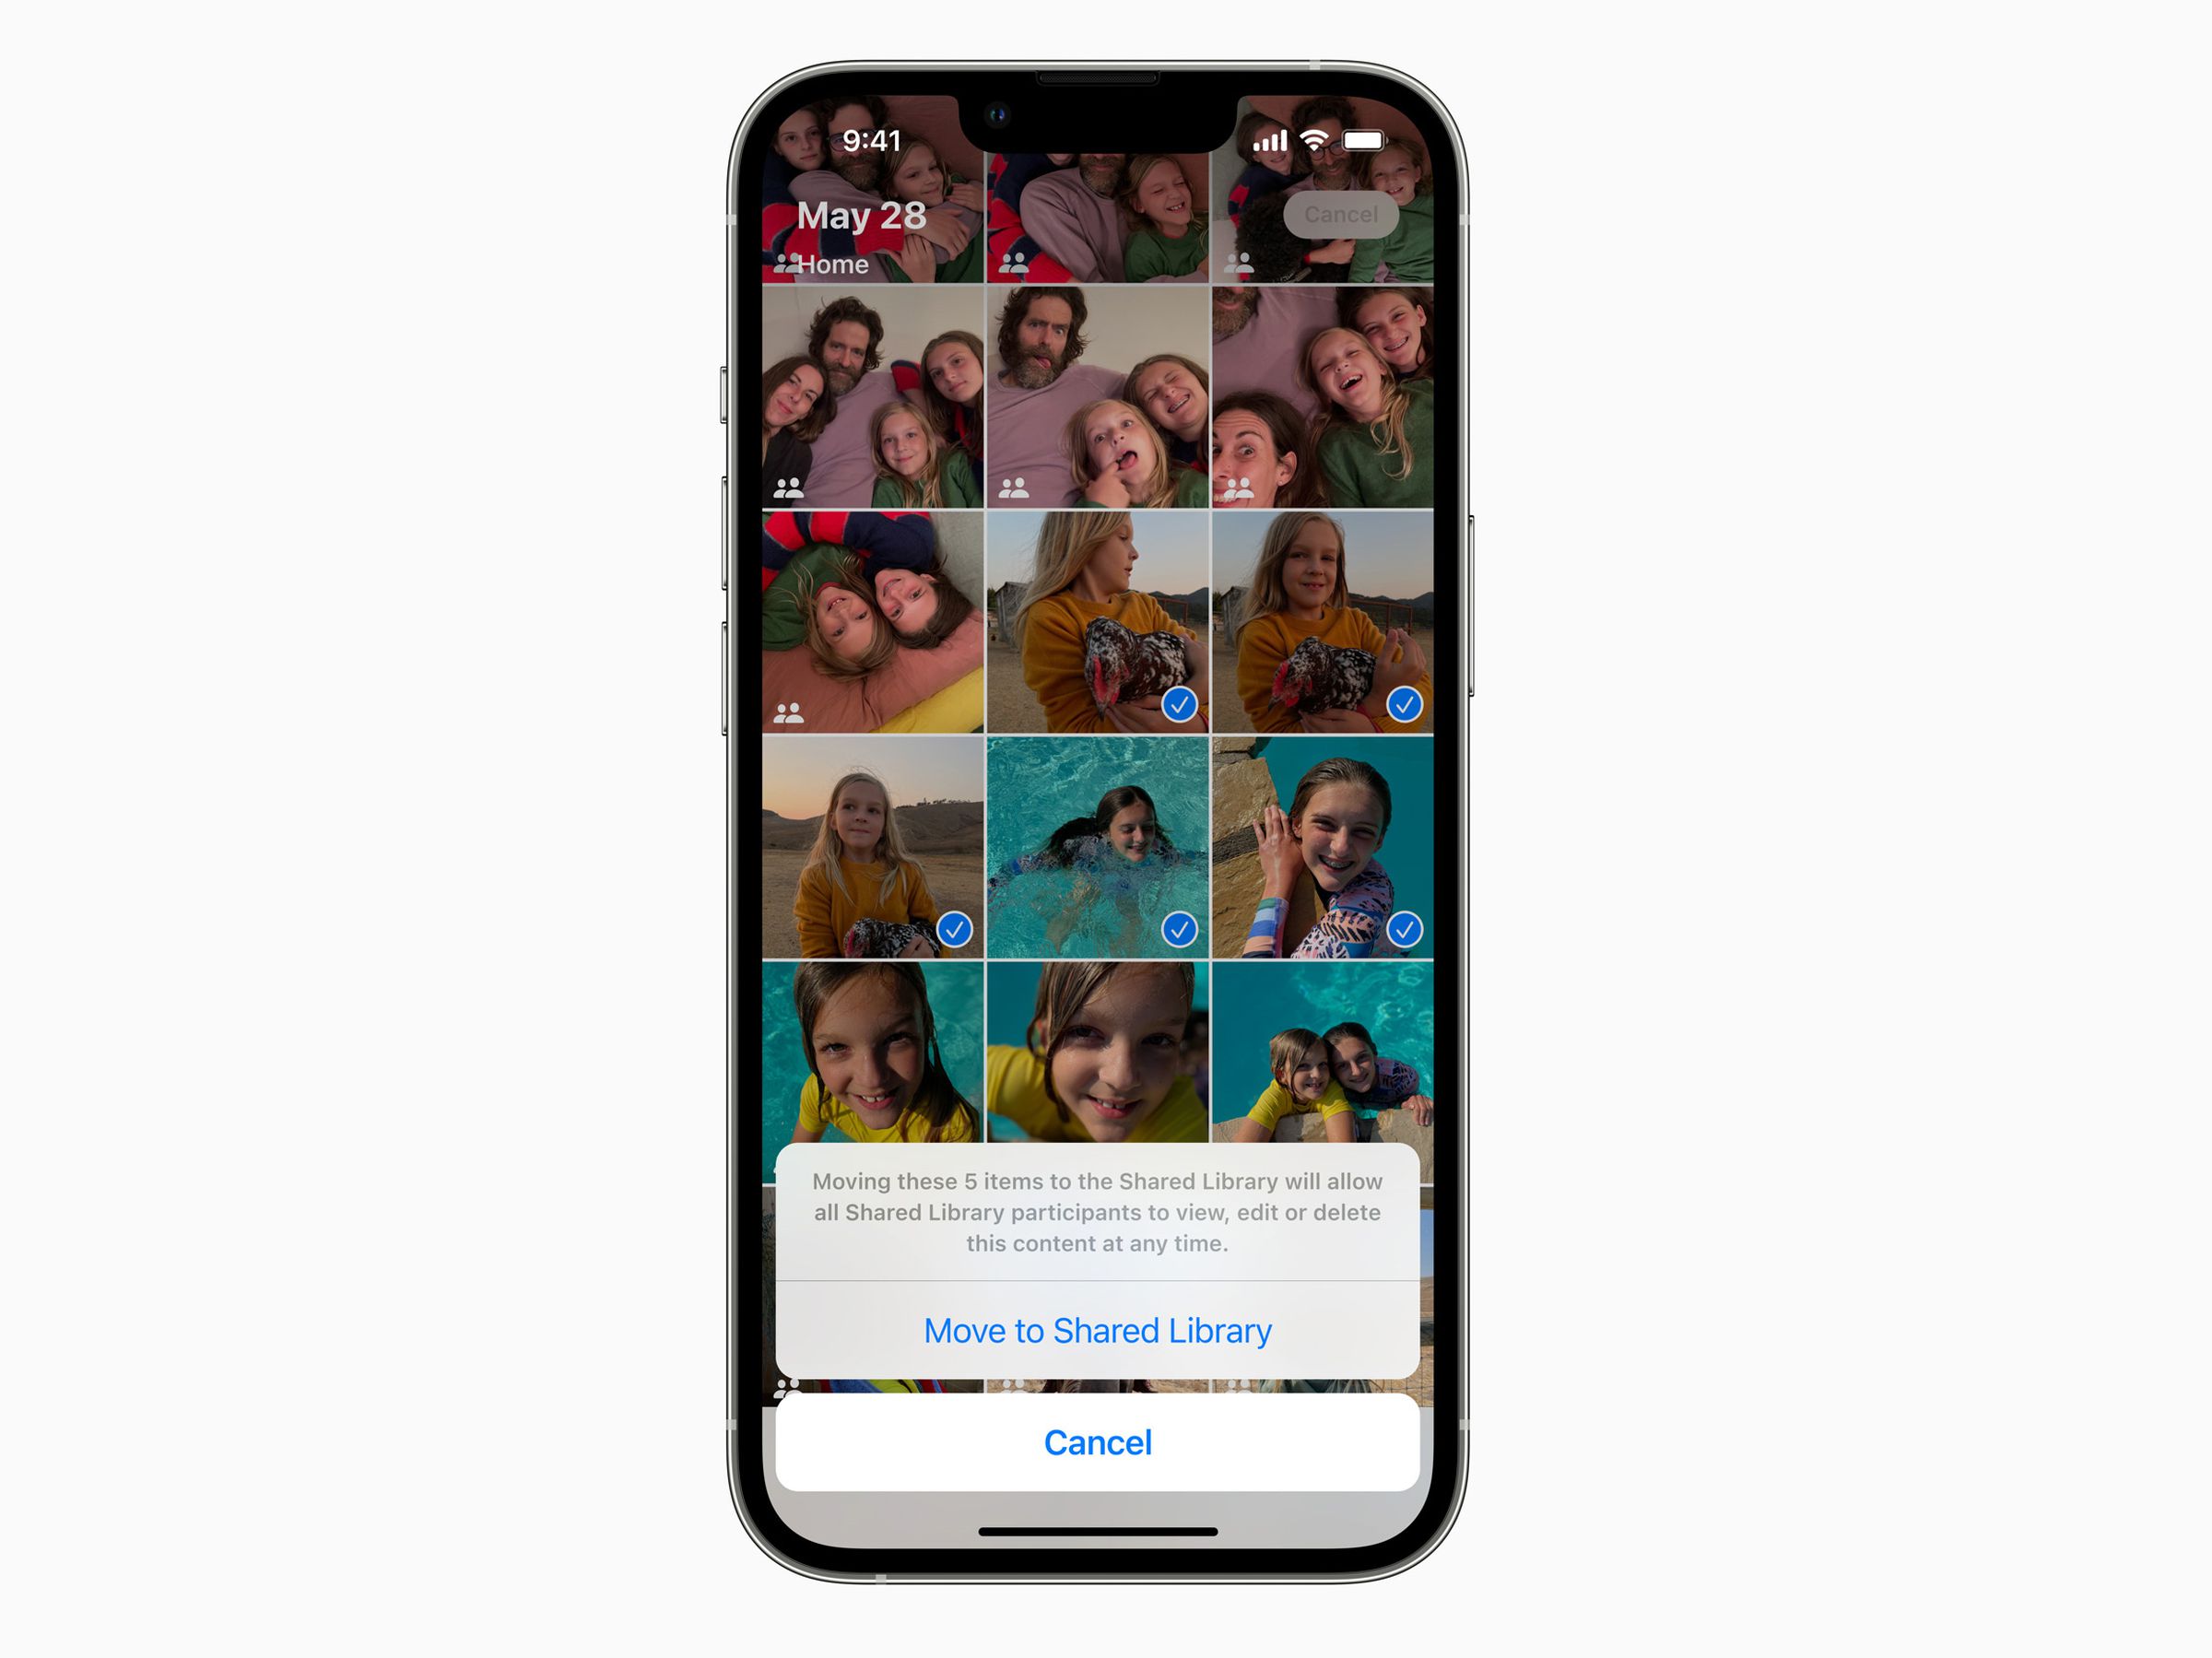 In iOS 16, users can sync photos across accounts in shared iCloud image libraries.